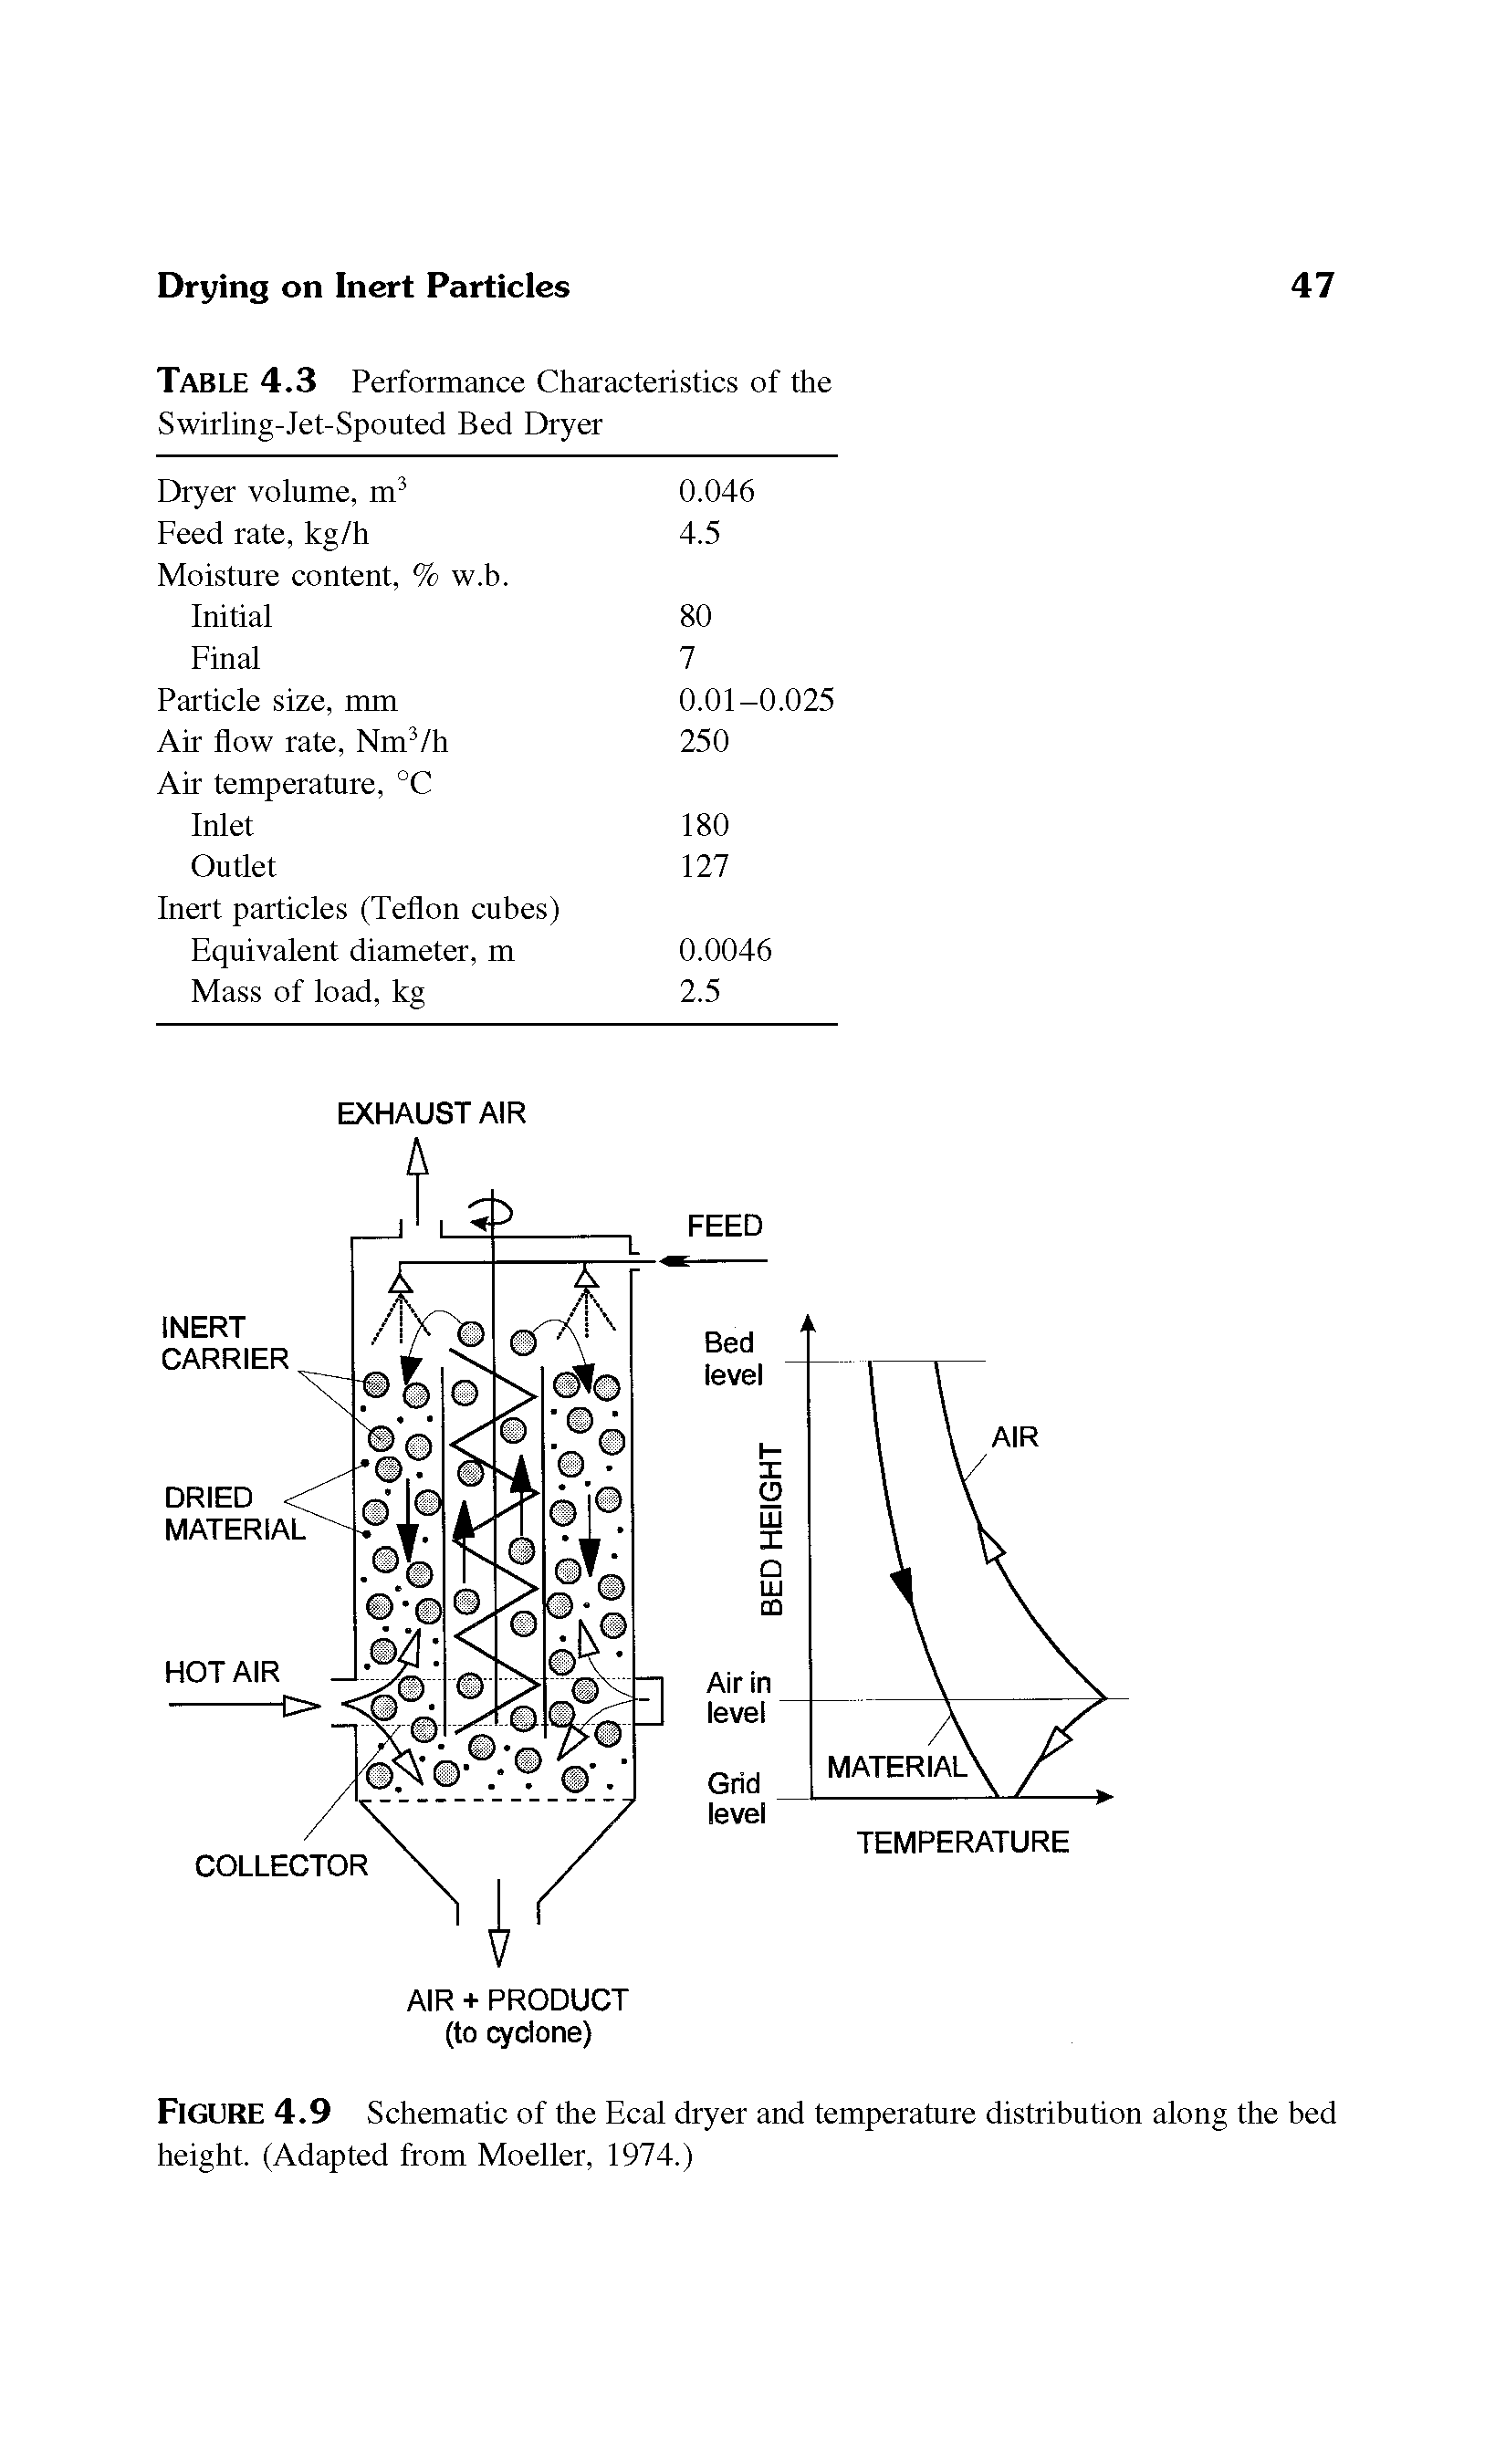 Figure 4.9 Schematic of the Ecal dryer and temperature distribution along the bed height. (Adapted from Moeller, 1974.)...